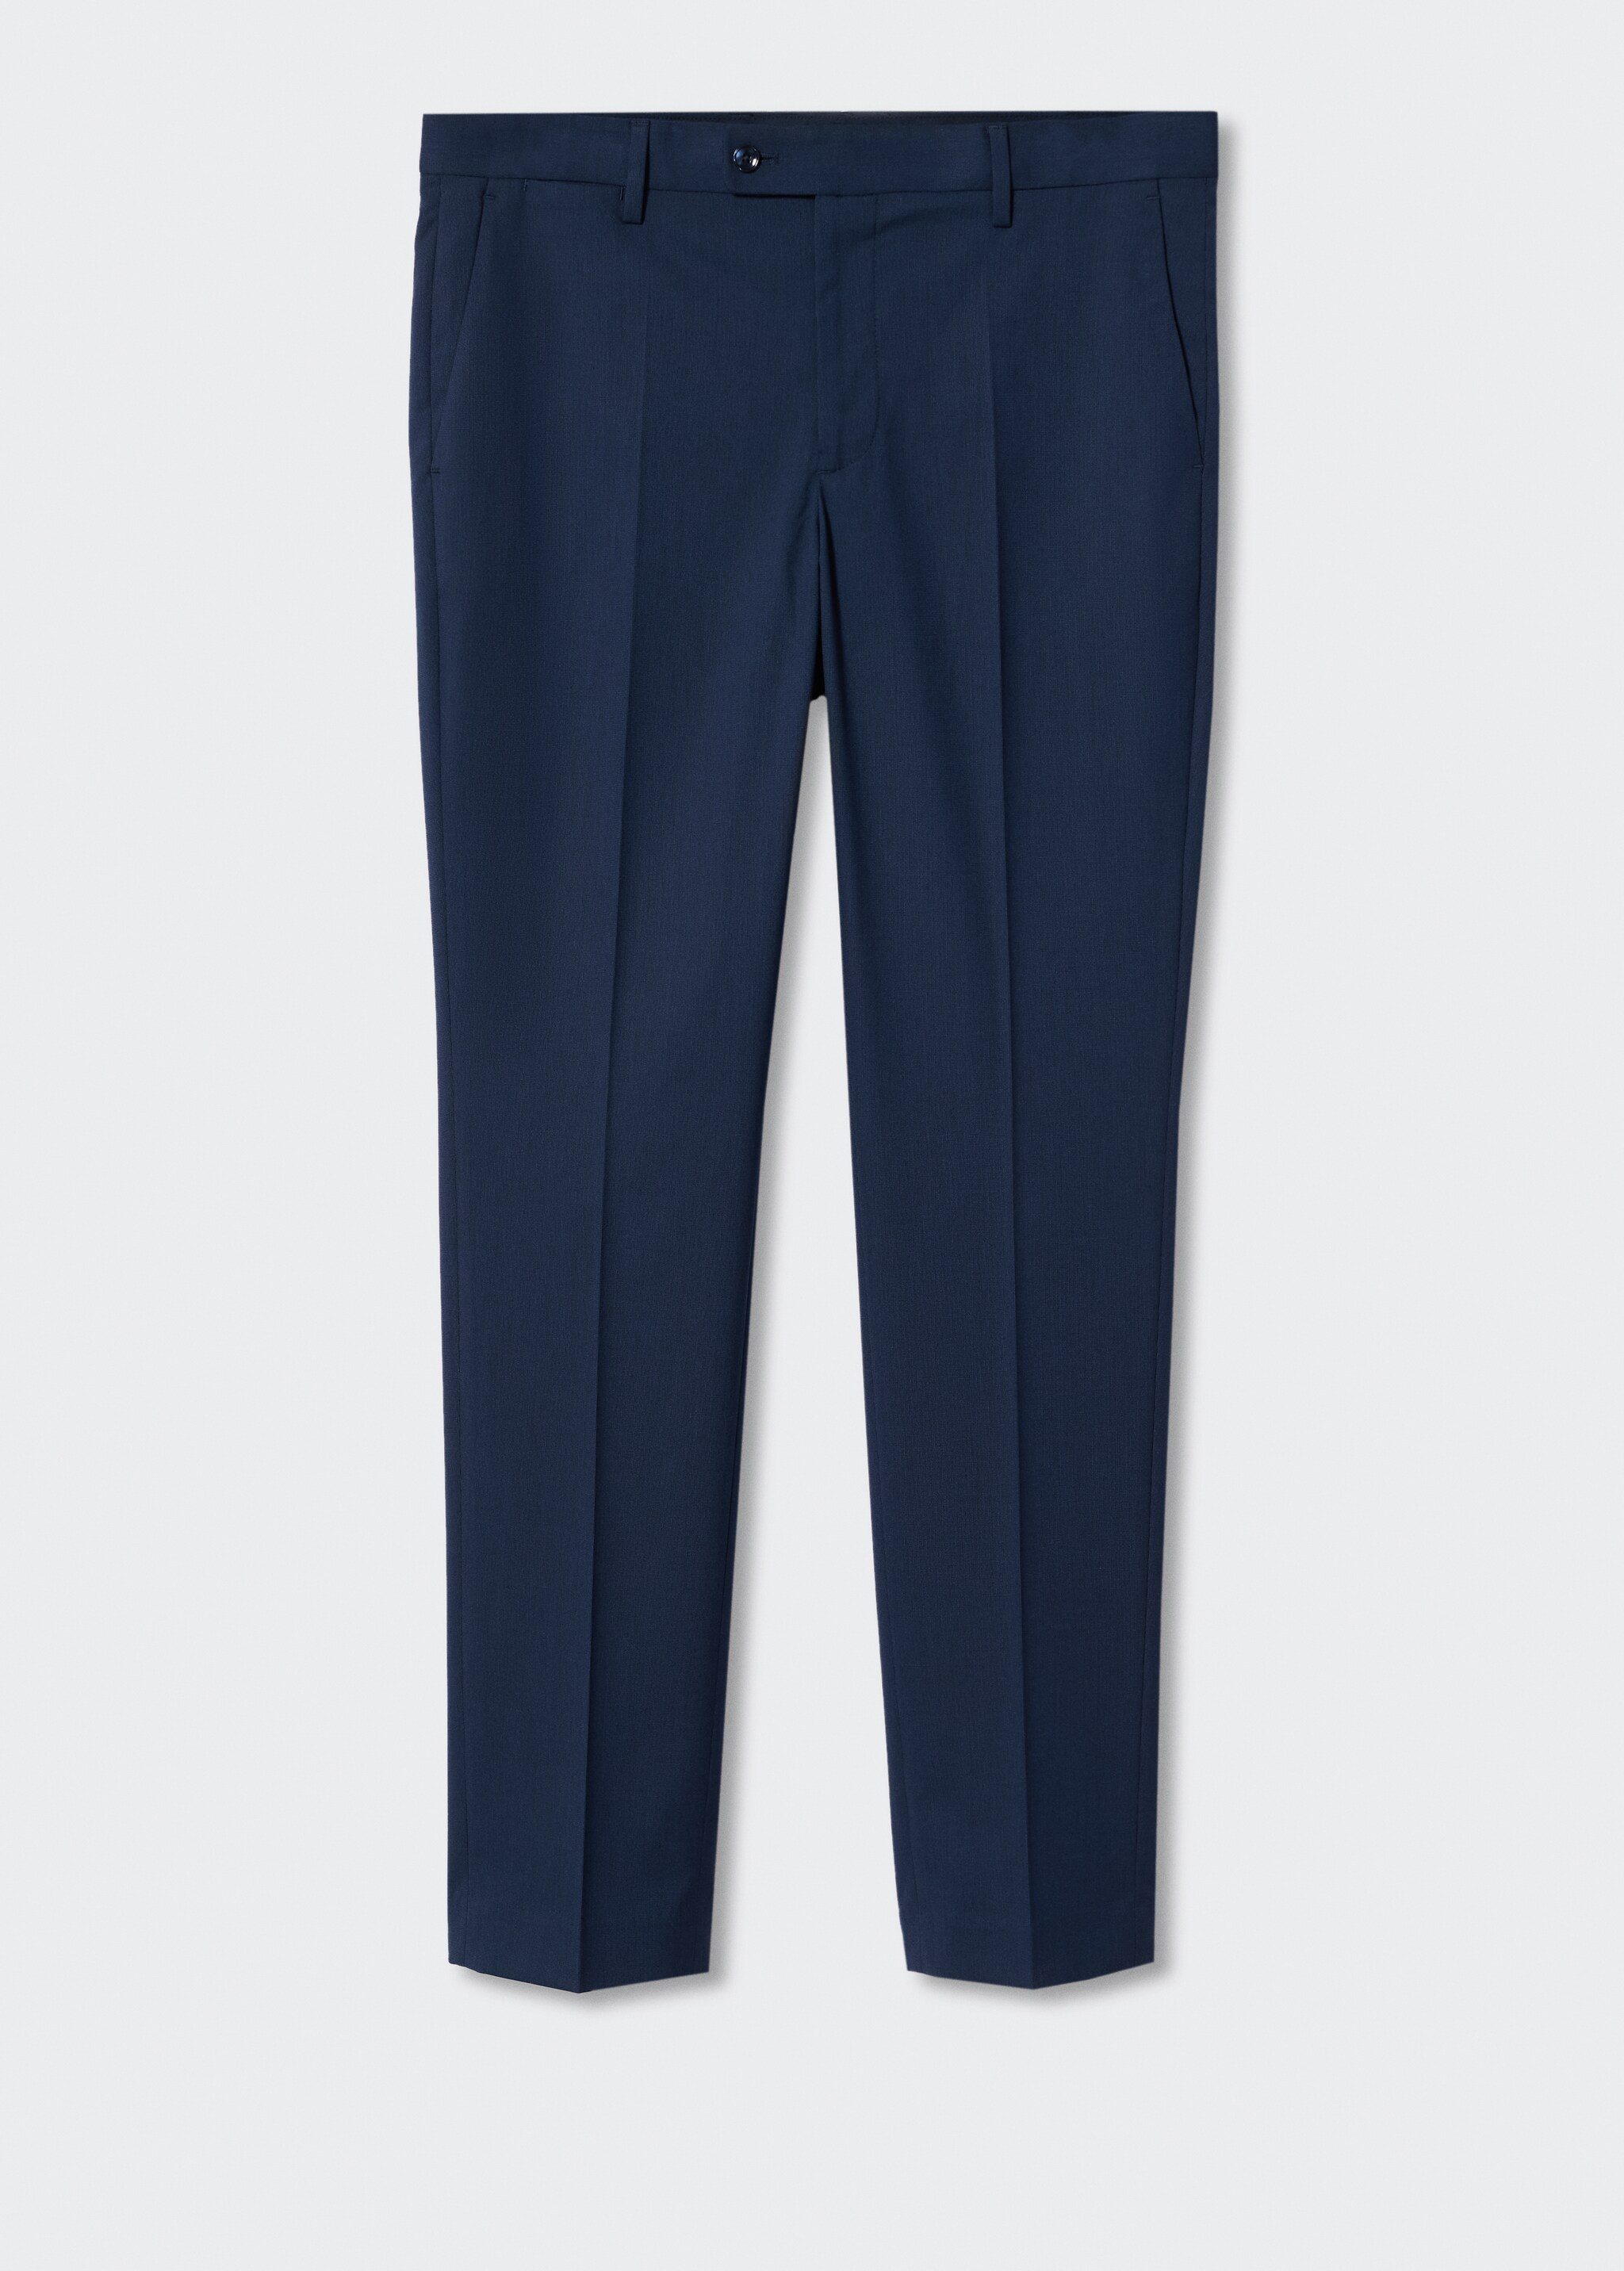 Slim fit microstructure suit trousers - Article without model